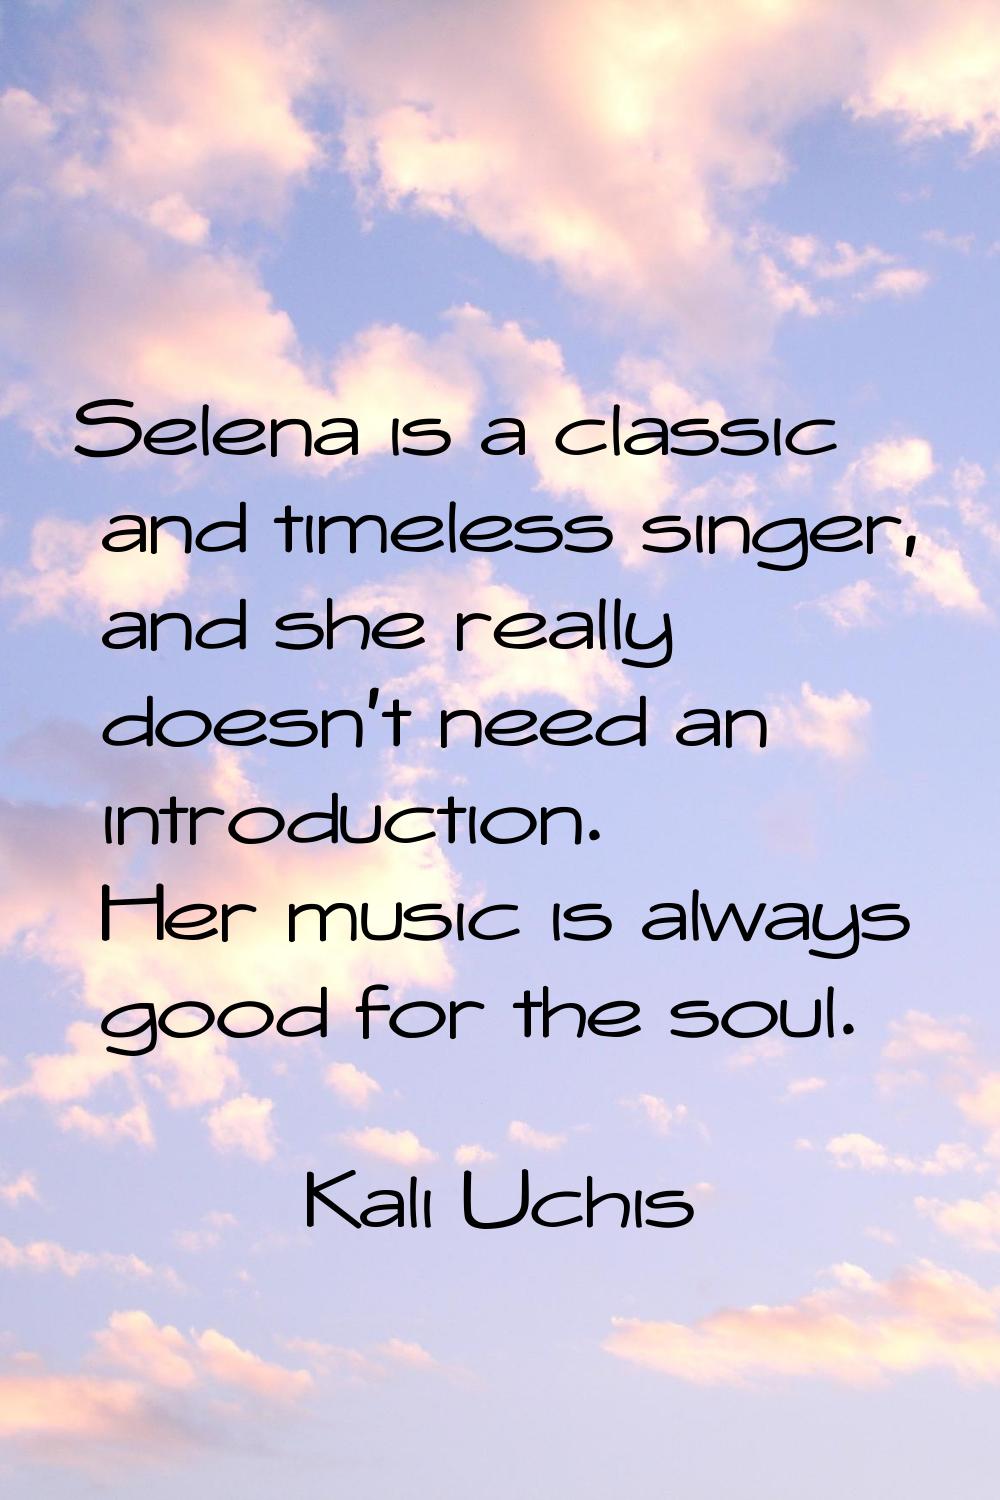 Selena is a classic and timeless singer, and she really doesn't need an introduction. Her music is 